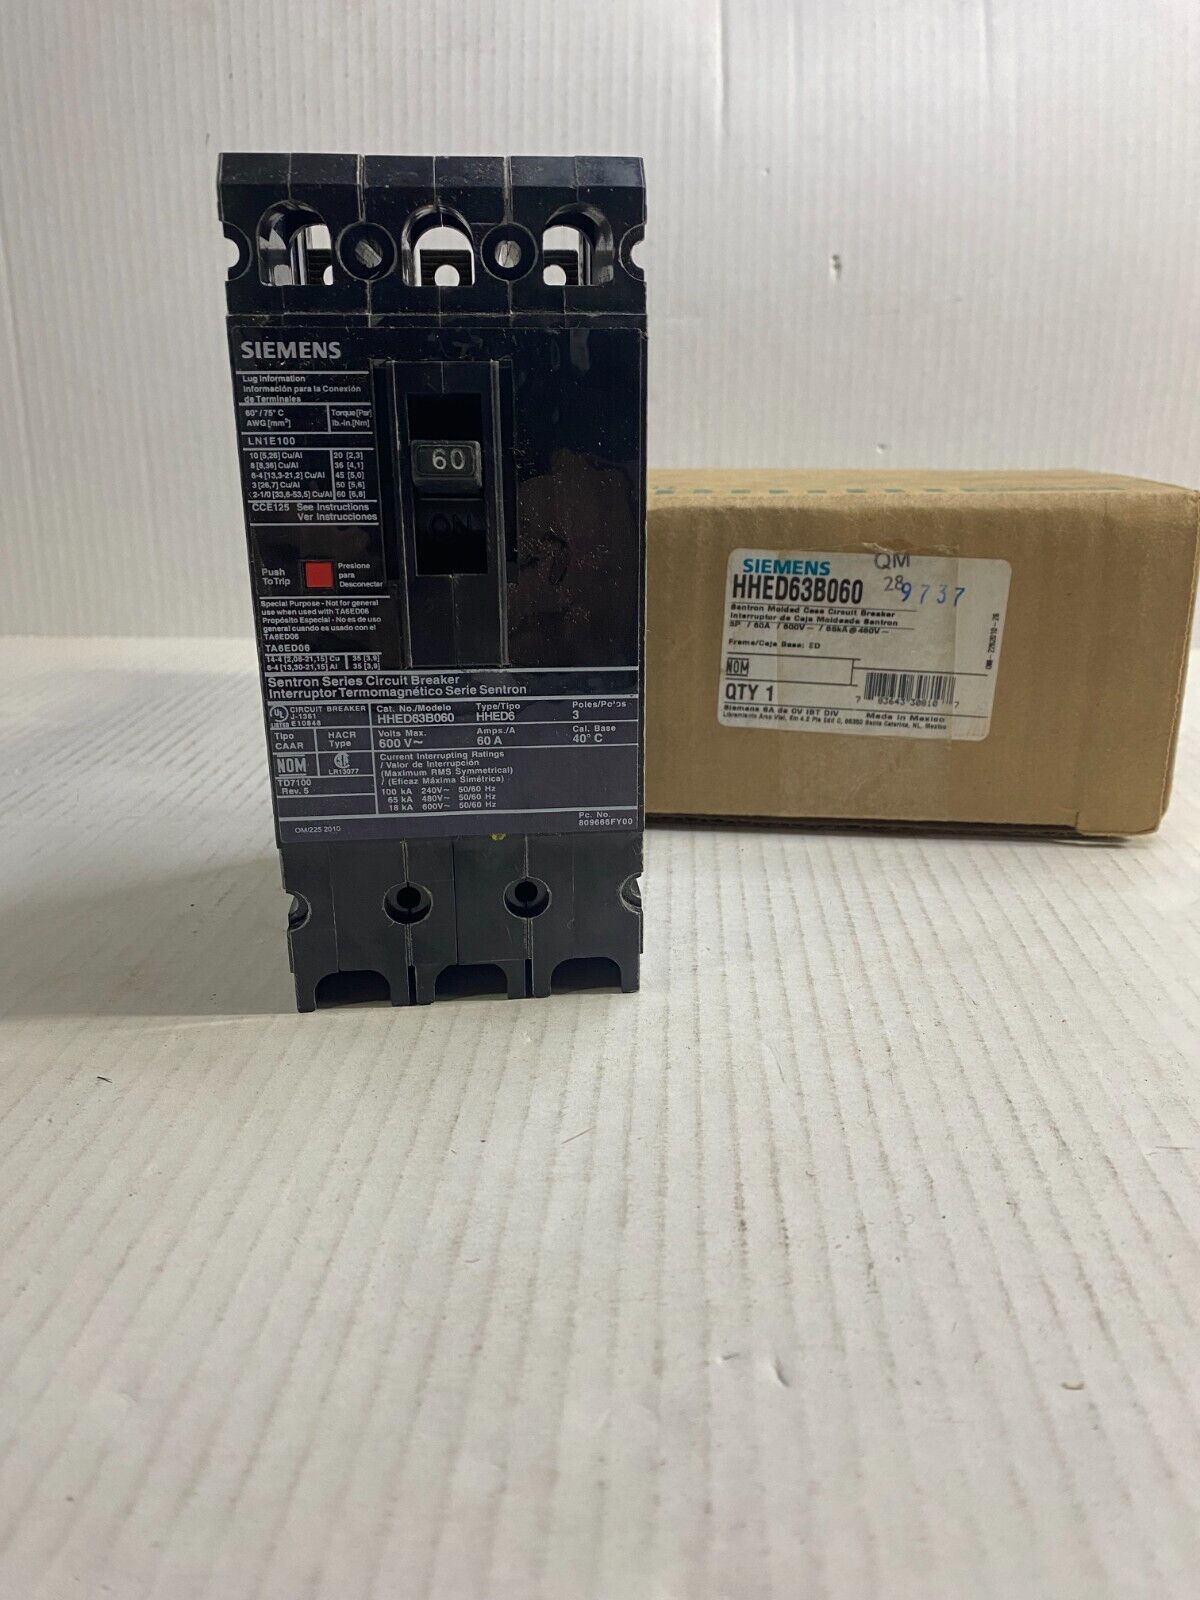 NEW IN BOX SIEMENS HHED63B060 (3P-60A-600V) *SHIPS SAME DAY UPS*